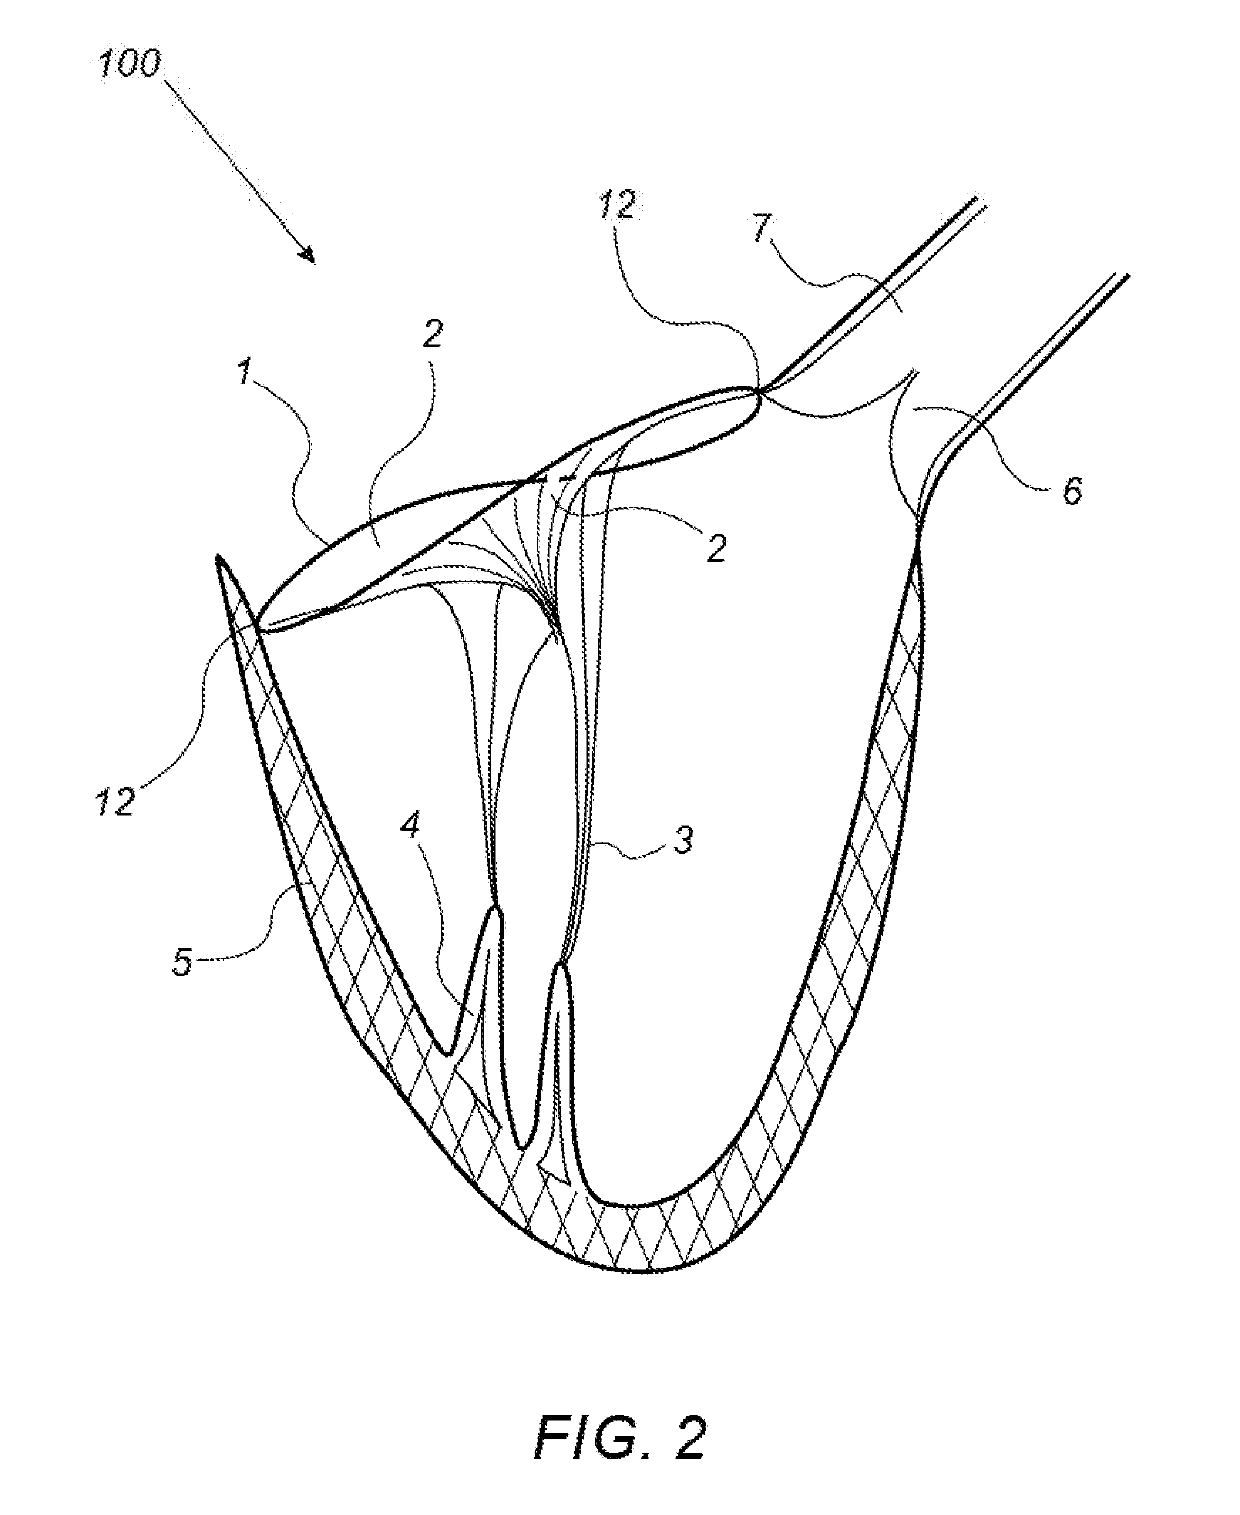 Naturally designed mitral prosthesis